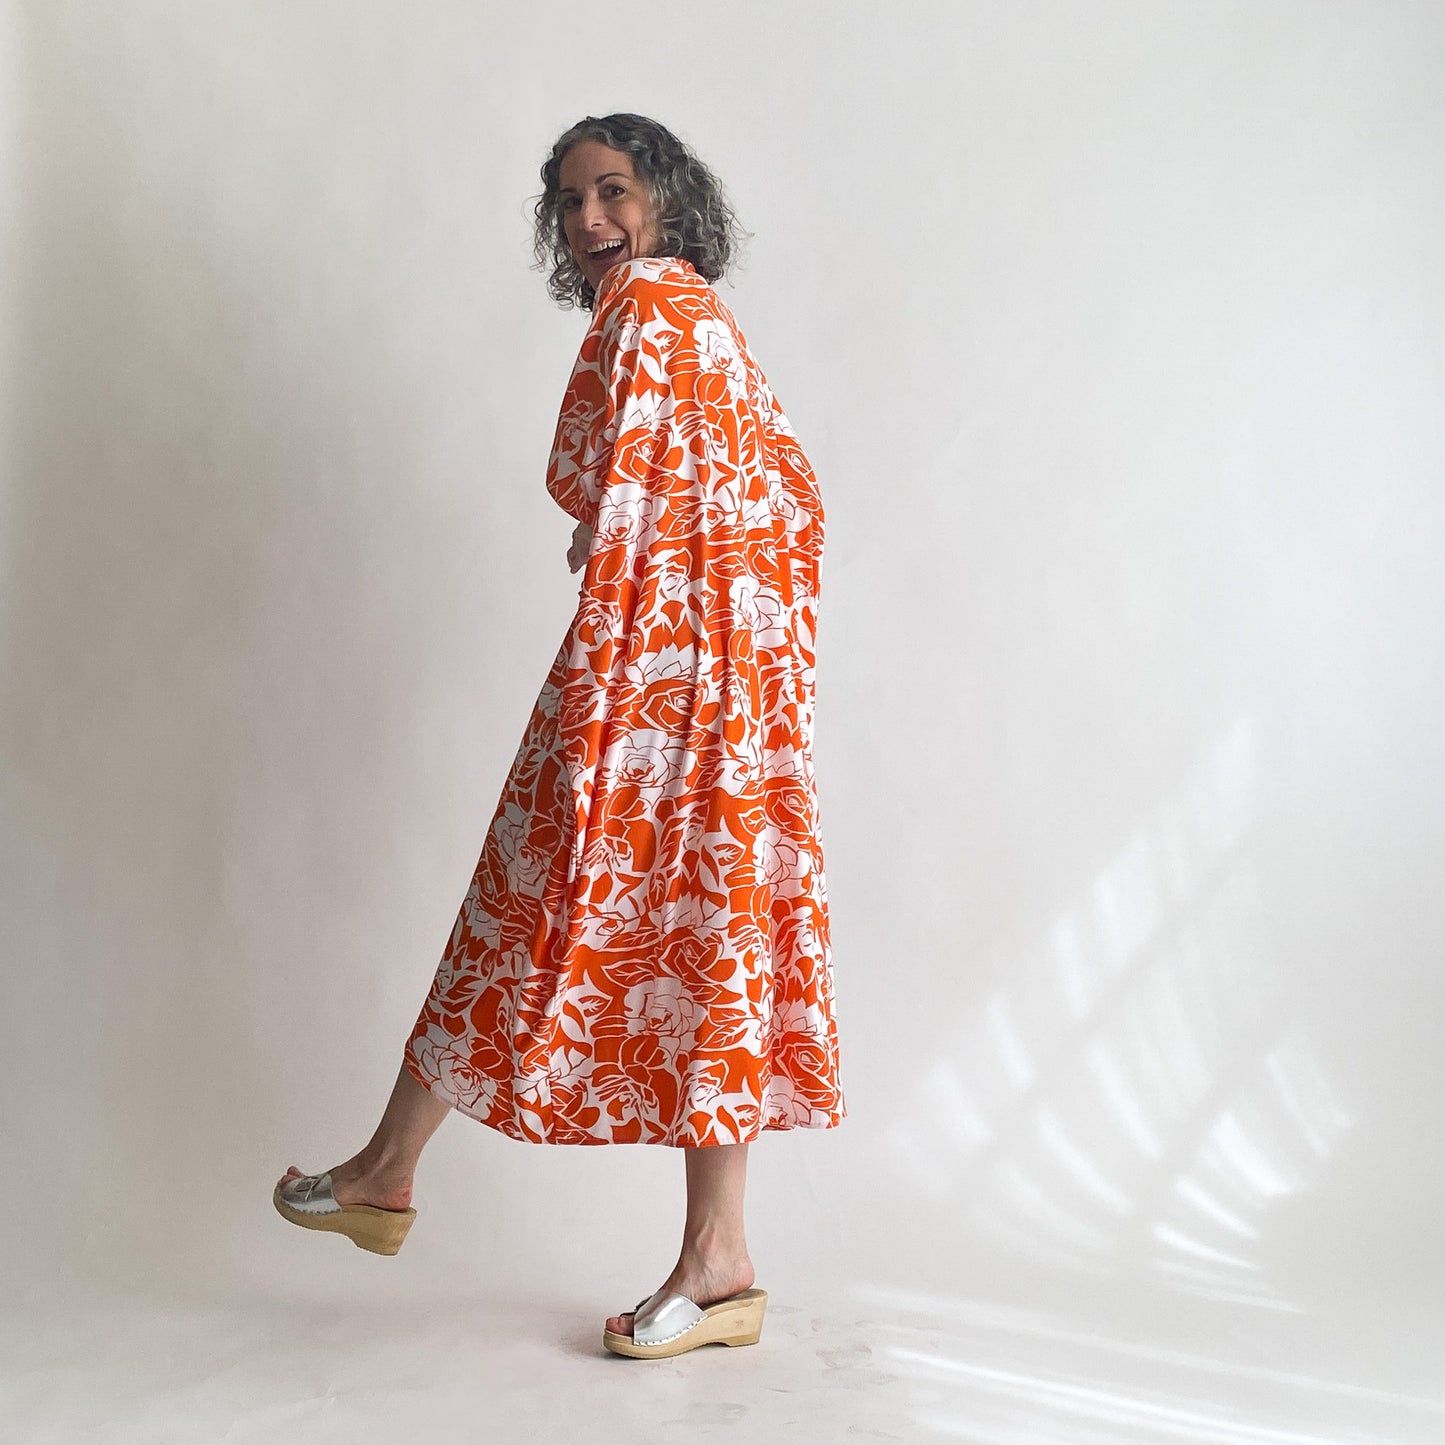 House of Lu Diana Caftan in Color Number 47. Orange and White vintage floral print in a vintage acetate fabric. Featured here in size Petite.